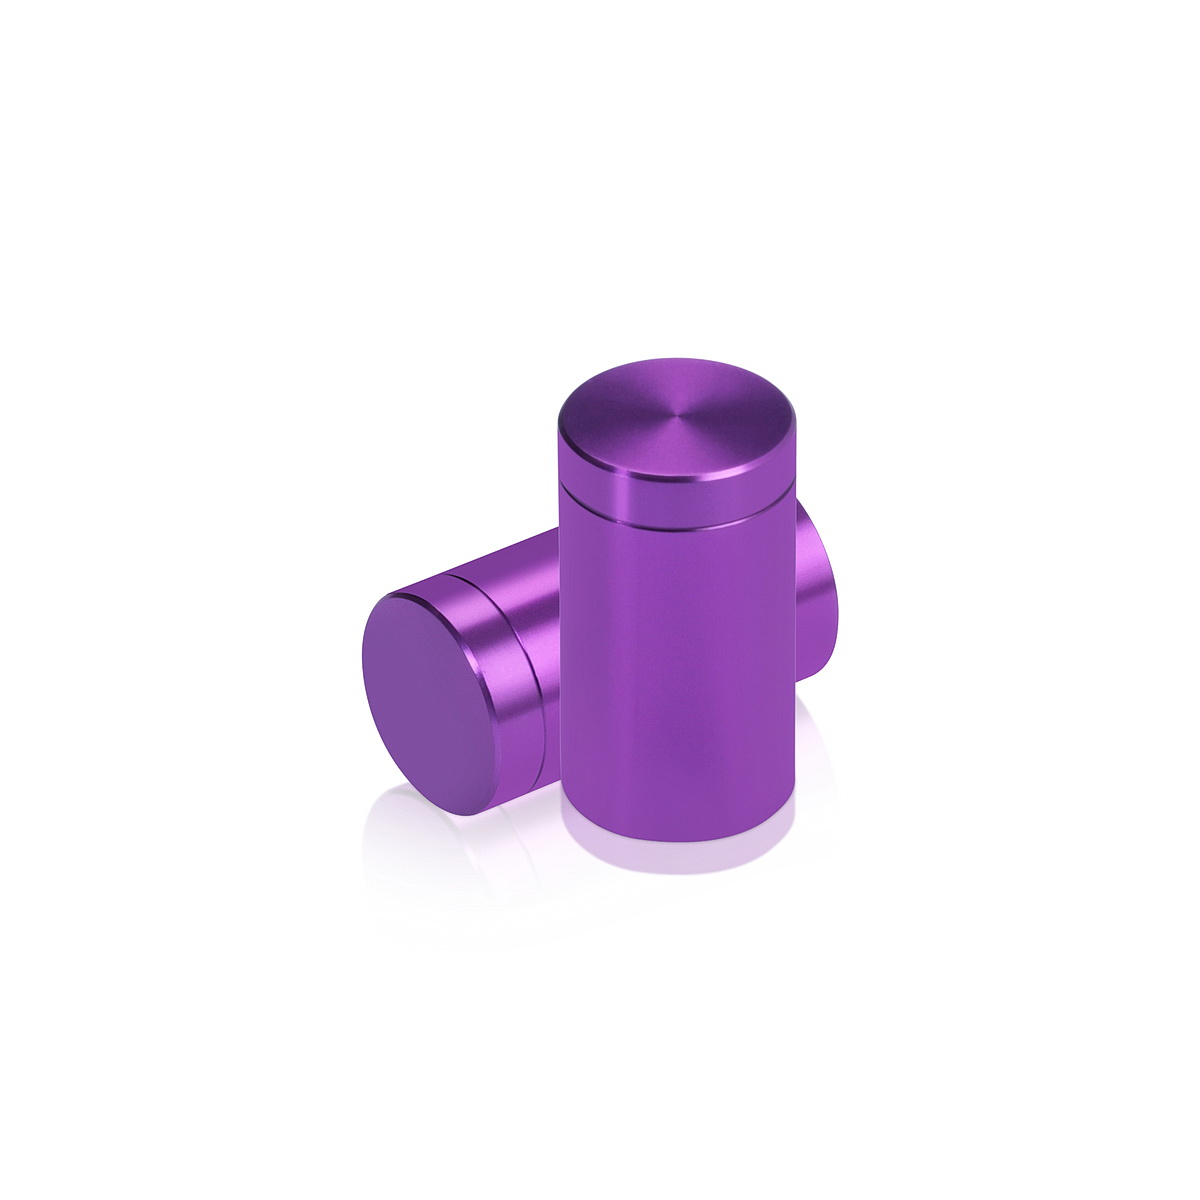 5/8'' Diameter X 1'' Barrel Length, Affordable Aluminum Standoffs, Purple Anodized Finish Easy Fasten Standoff (For Inside / Outside use) [Required Material Hole Size: 7/16'']